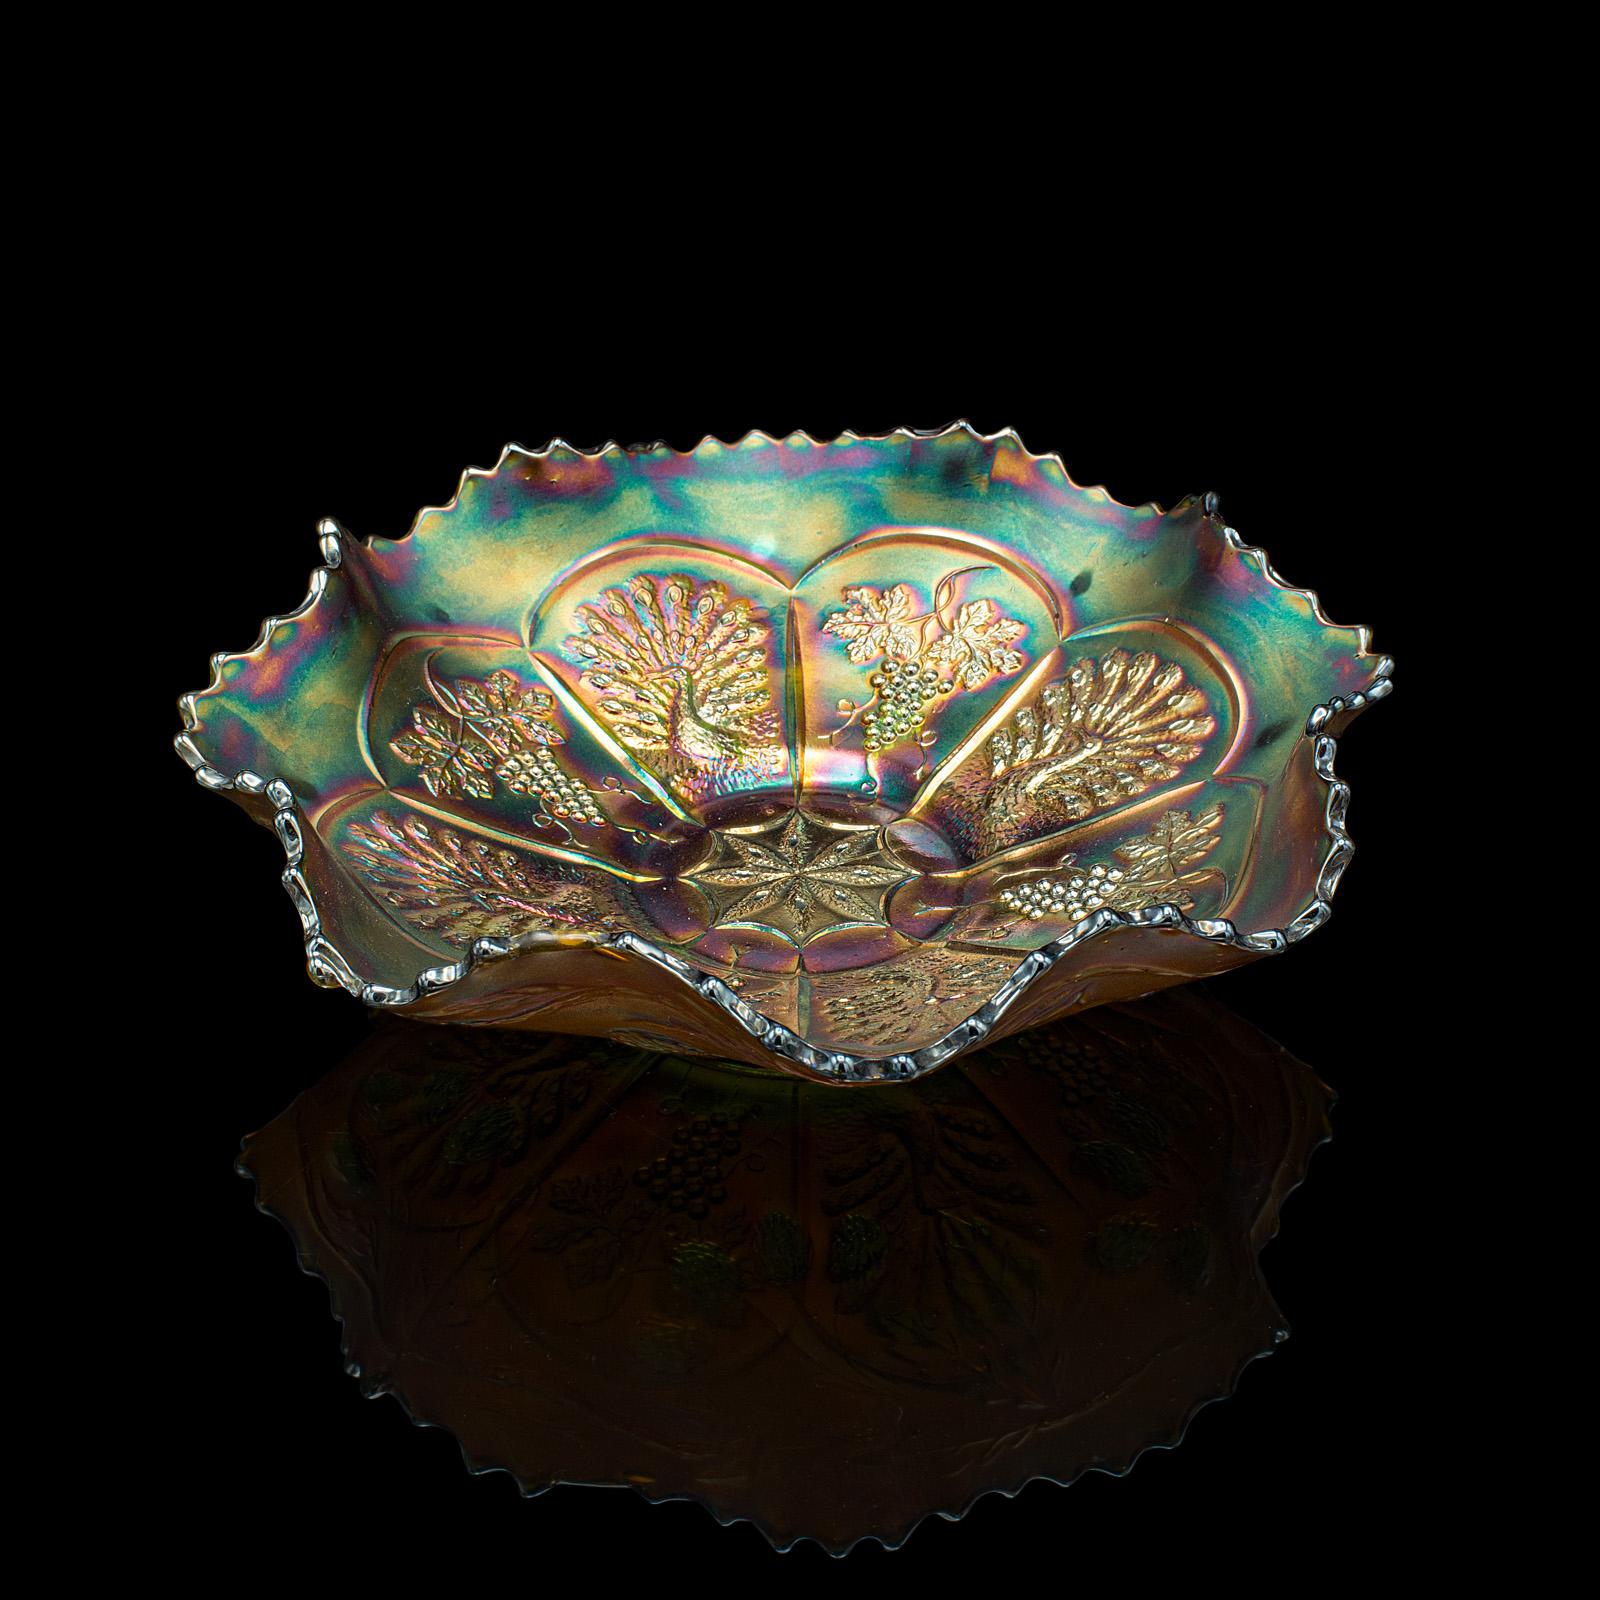 Small Vintage Lustre Dish, Continental, Art Glass, Decorative Fruit Bowl, C.1970 In Good Condition For Sale In Hele, Devon, GB